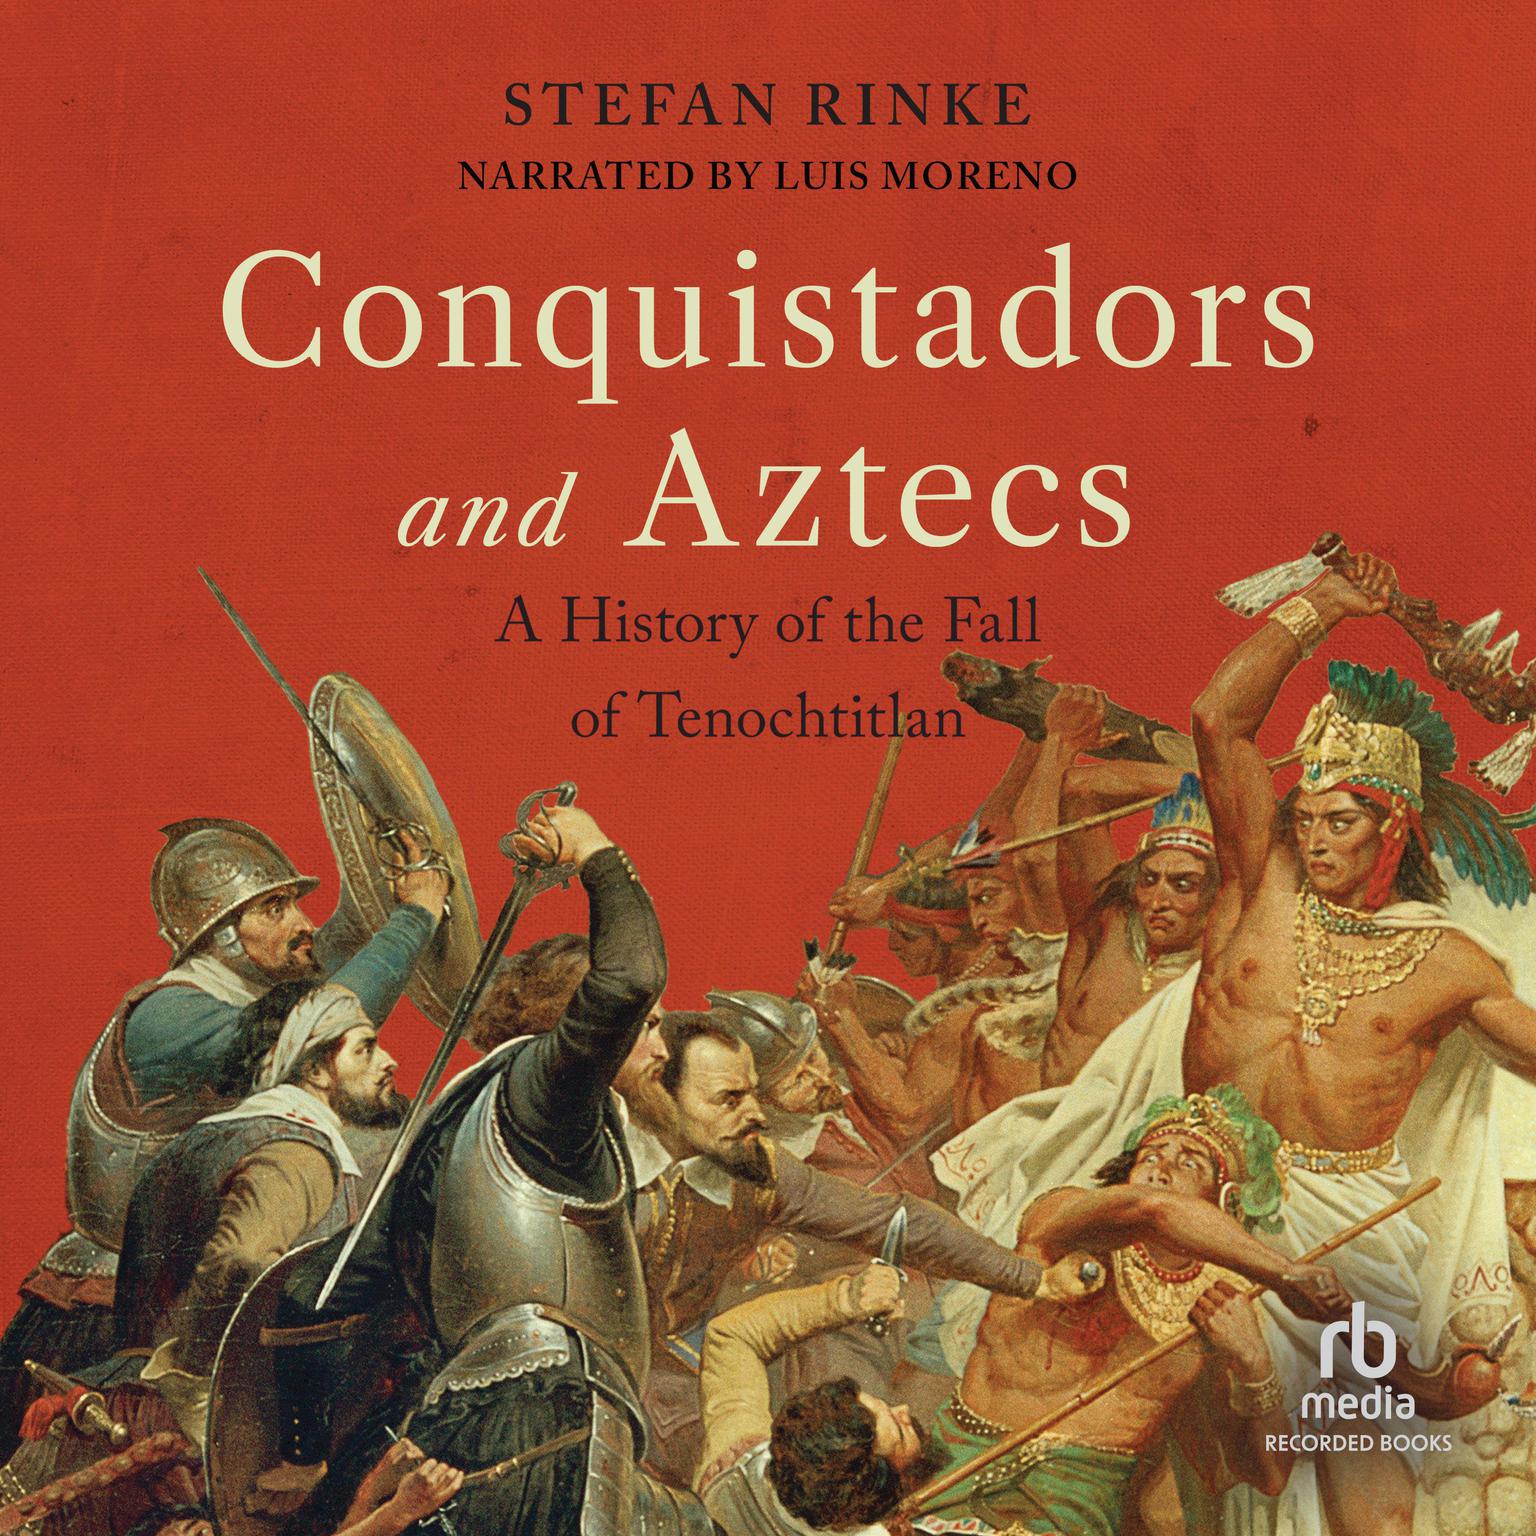 Conquistadors and Aztecs: A History of the Fall of Tenochtitlan Audiobook, by Stefan Rinke